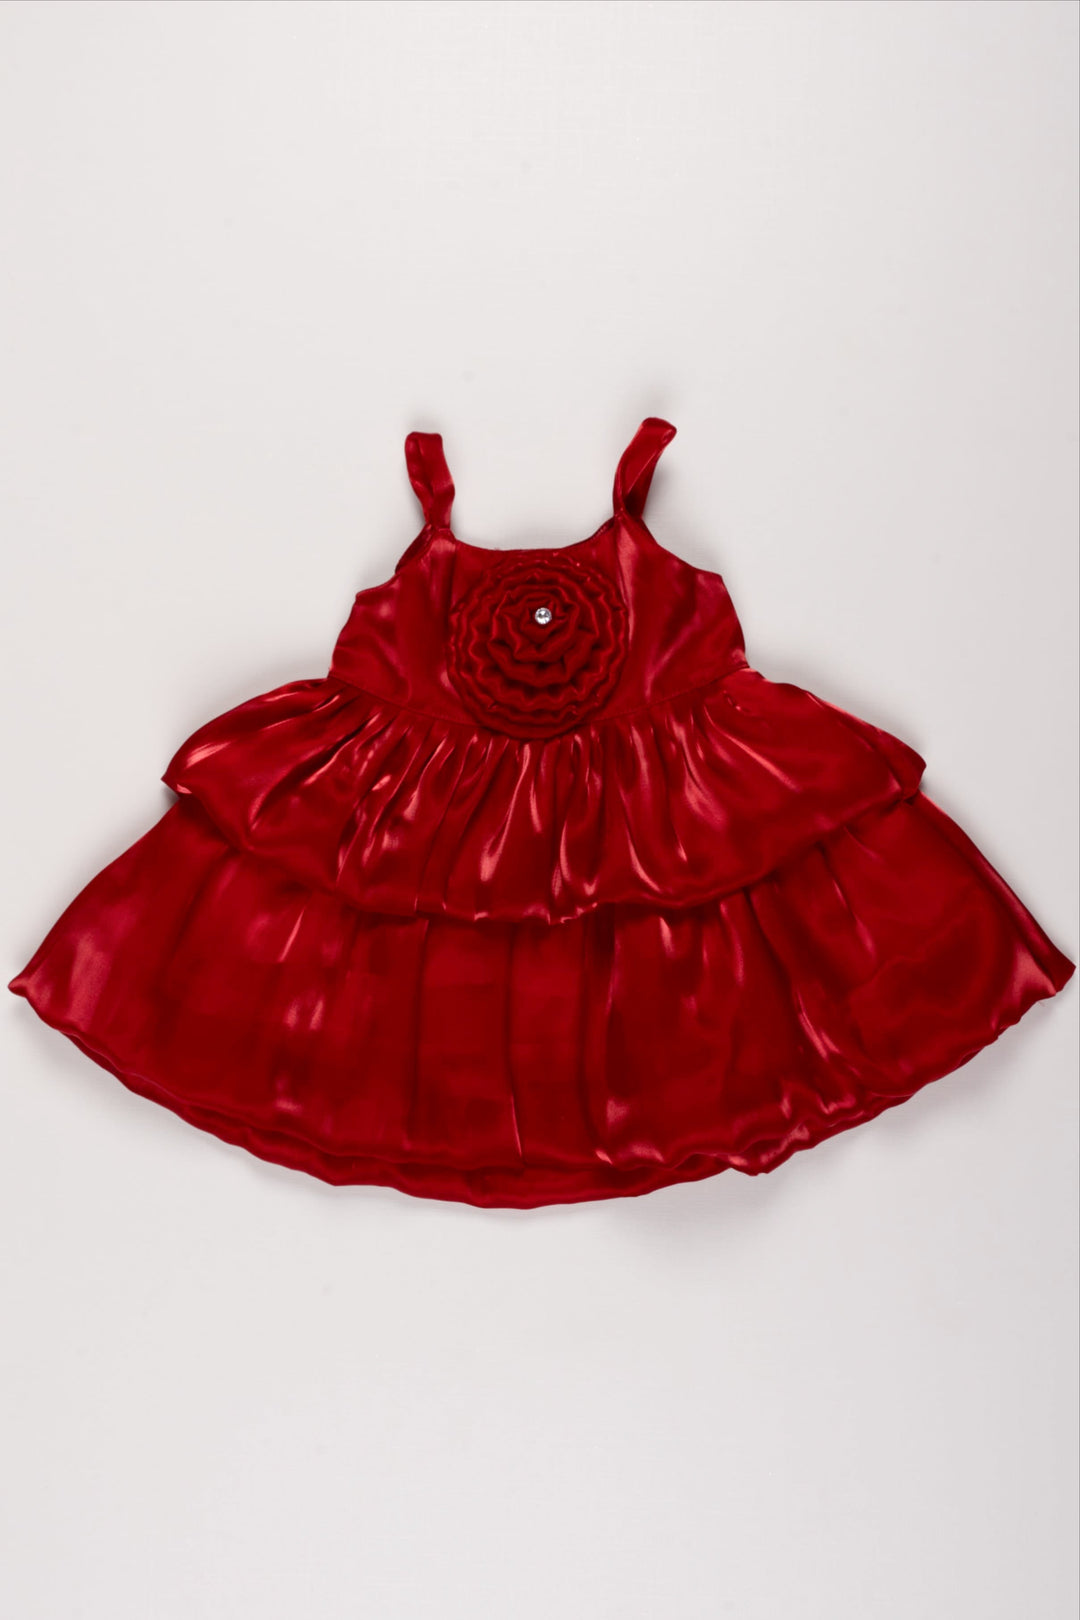 The Nesavu Girls Fancy Party Frock Ruby Red Organza Party Dress with Rosette Accent for Girls Nesavu 12 (3M) / Red / Organza PF171C-12 Girls Red Organza Dress | Rosette Tiered Party Dress for Kids | The Nesavu